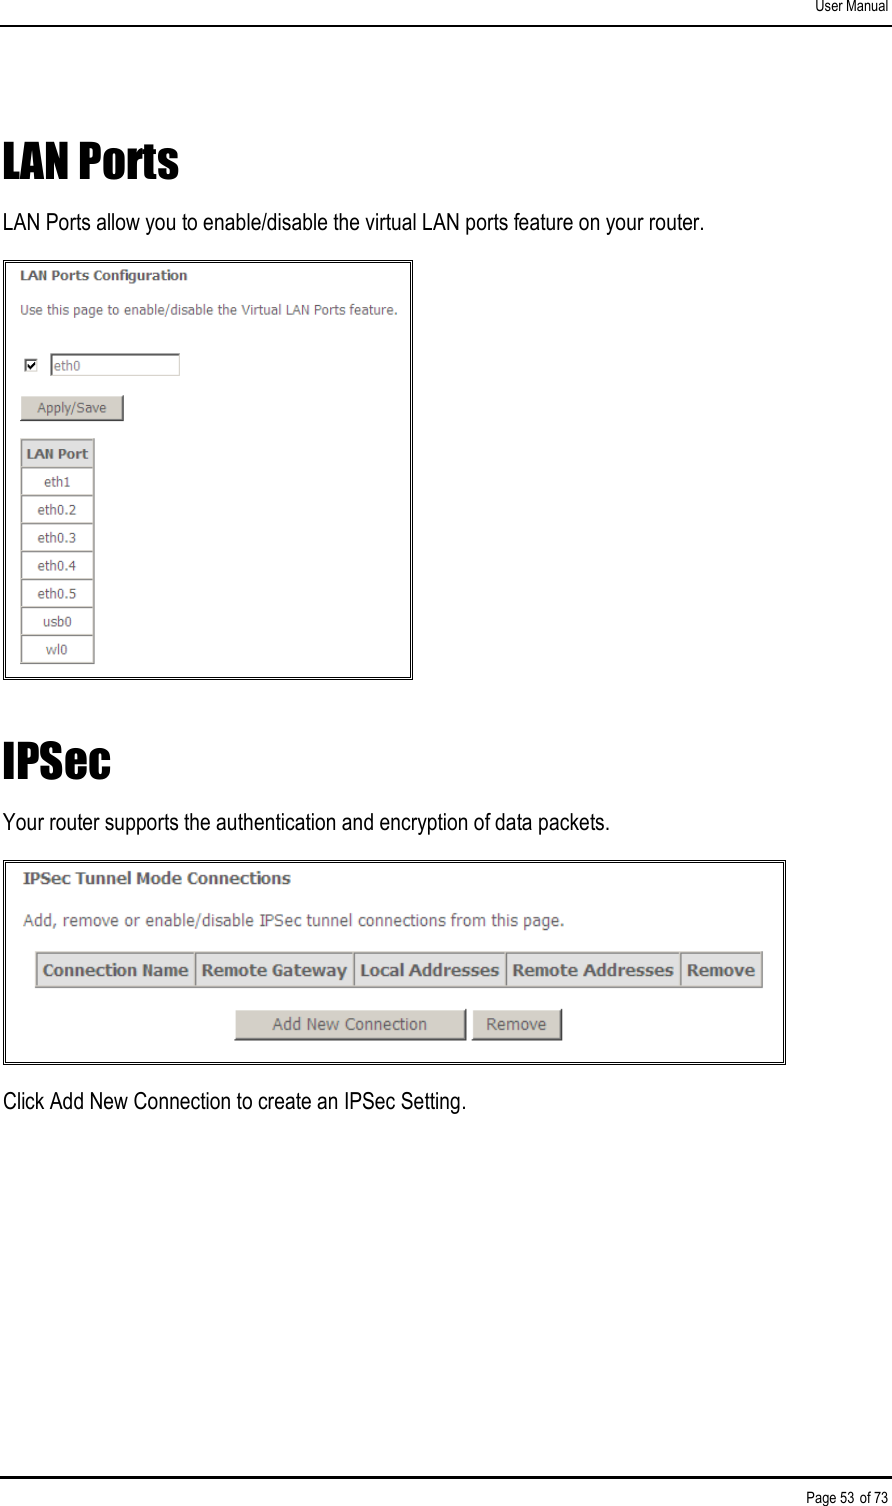 User Manual Page 53 of 73 LAN Ports LAN Ports allow you to enable/disable the virtual LAN ports feature on your router.  IPSec Your router supports the authentication and encryption of data packets.  Click Add New Connection to create an IPSec Setting. 